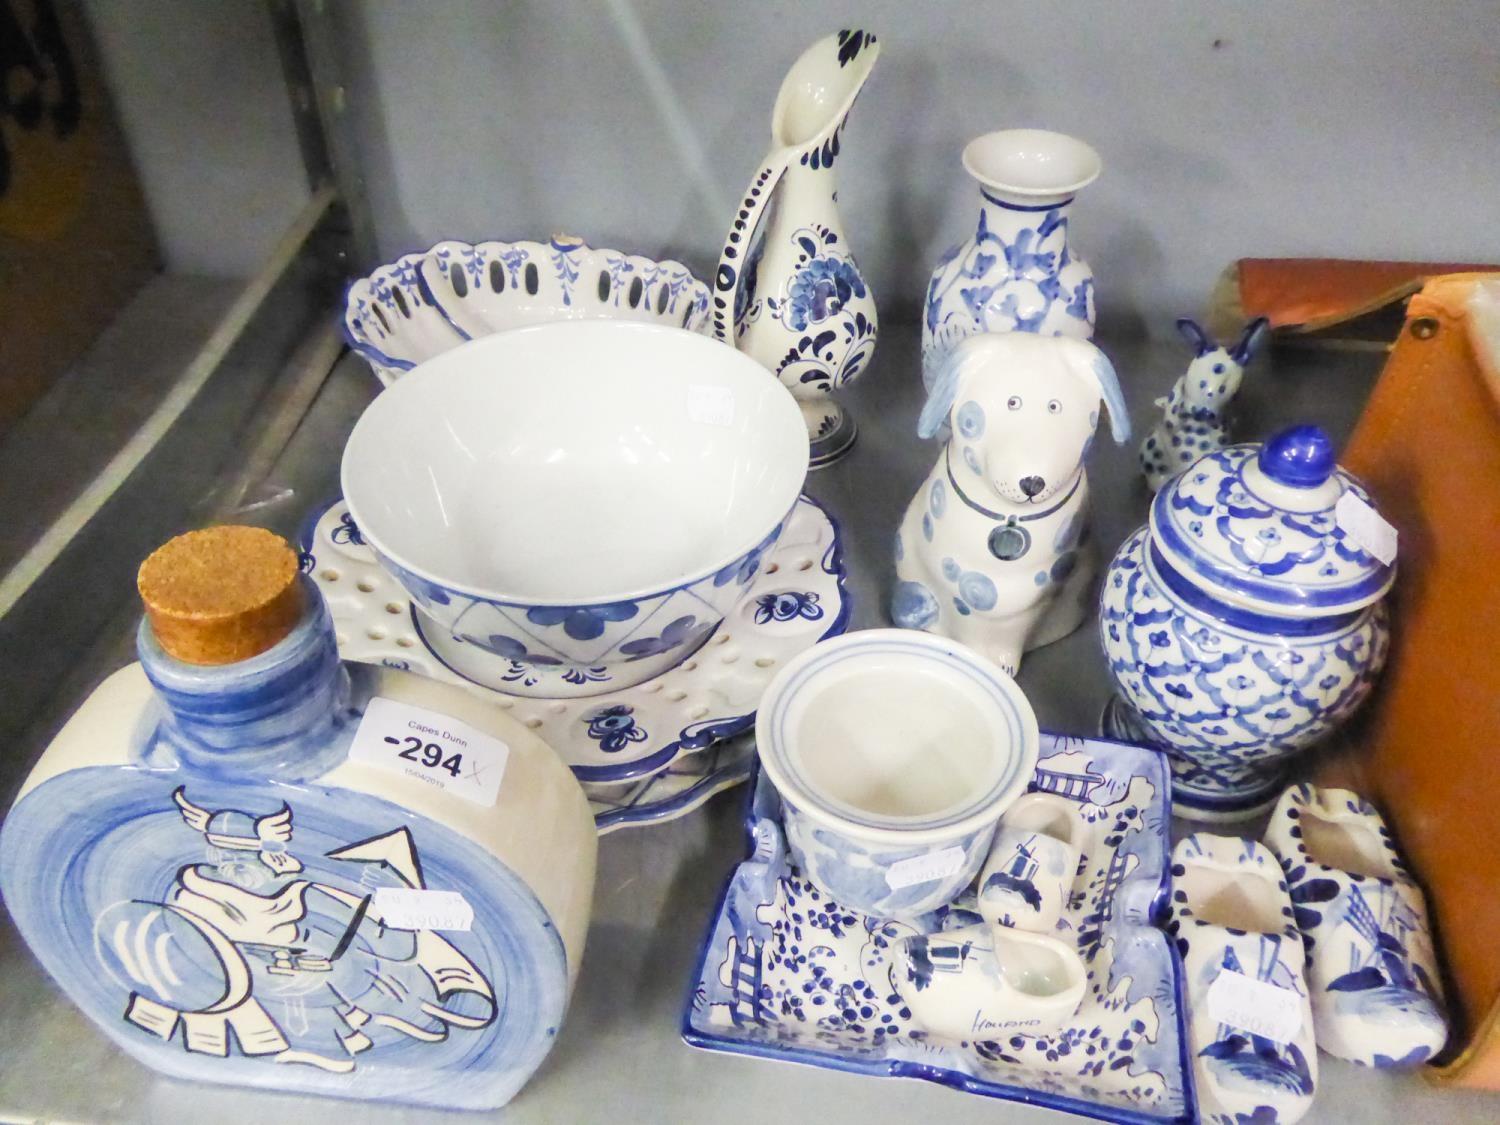 14 PIECES OF BLUE AND WHITE POTTERY TO INCLUDE; CLOGS, RUSHTON POTTERY JURBY 'ISLE OF MAN', PLATES